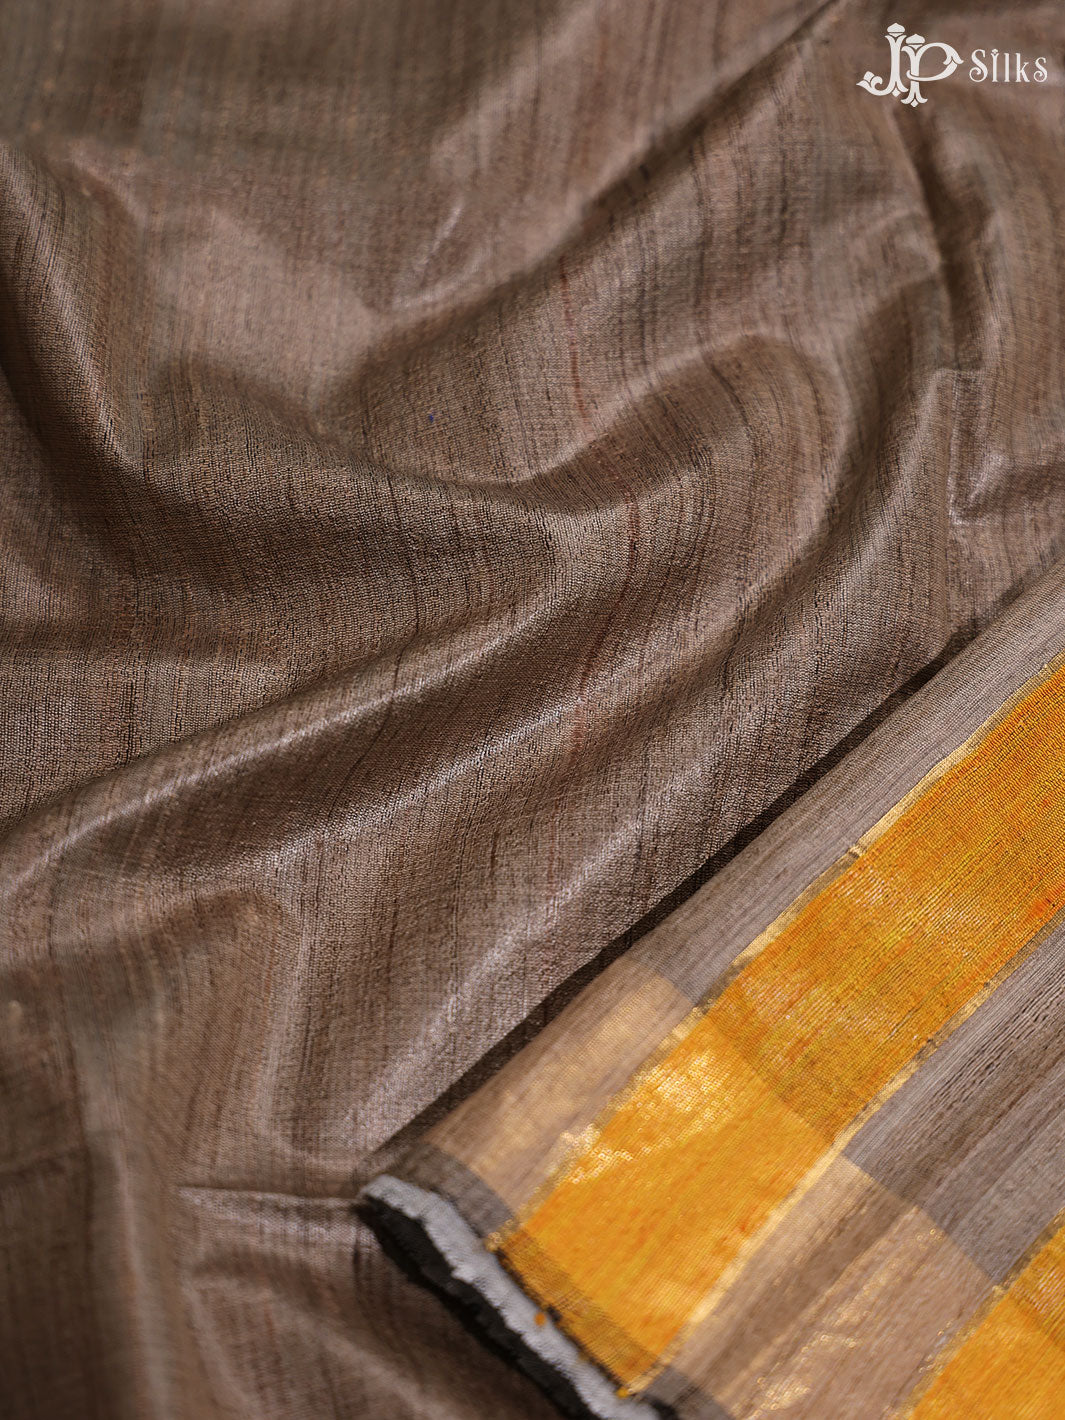 Beige and Yellow Tussar Silk Saree - E41 - View 4